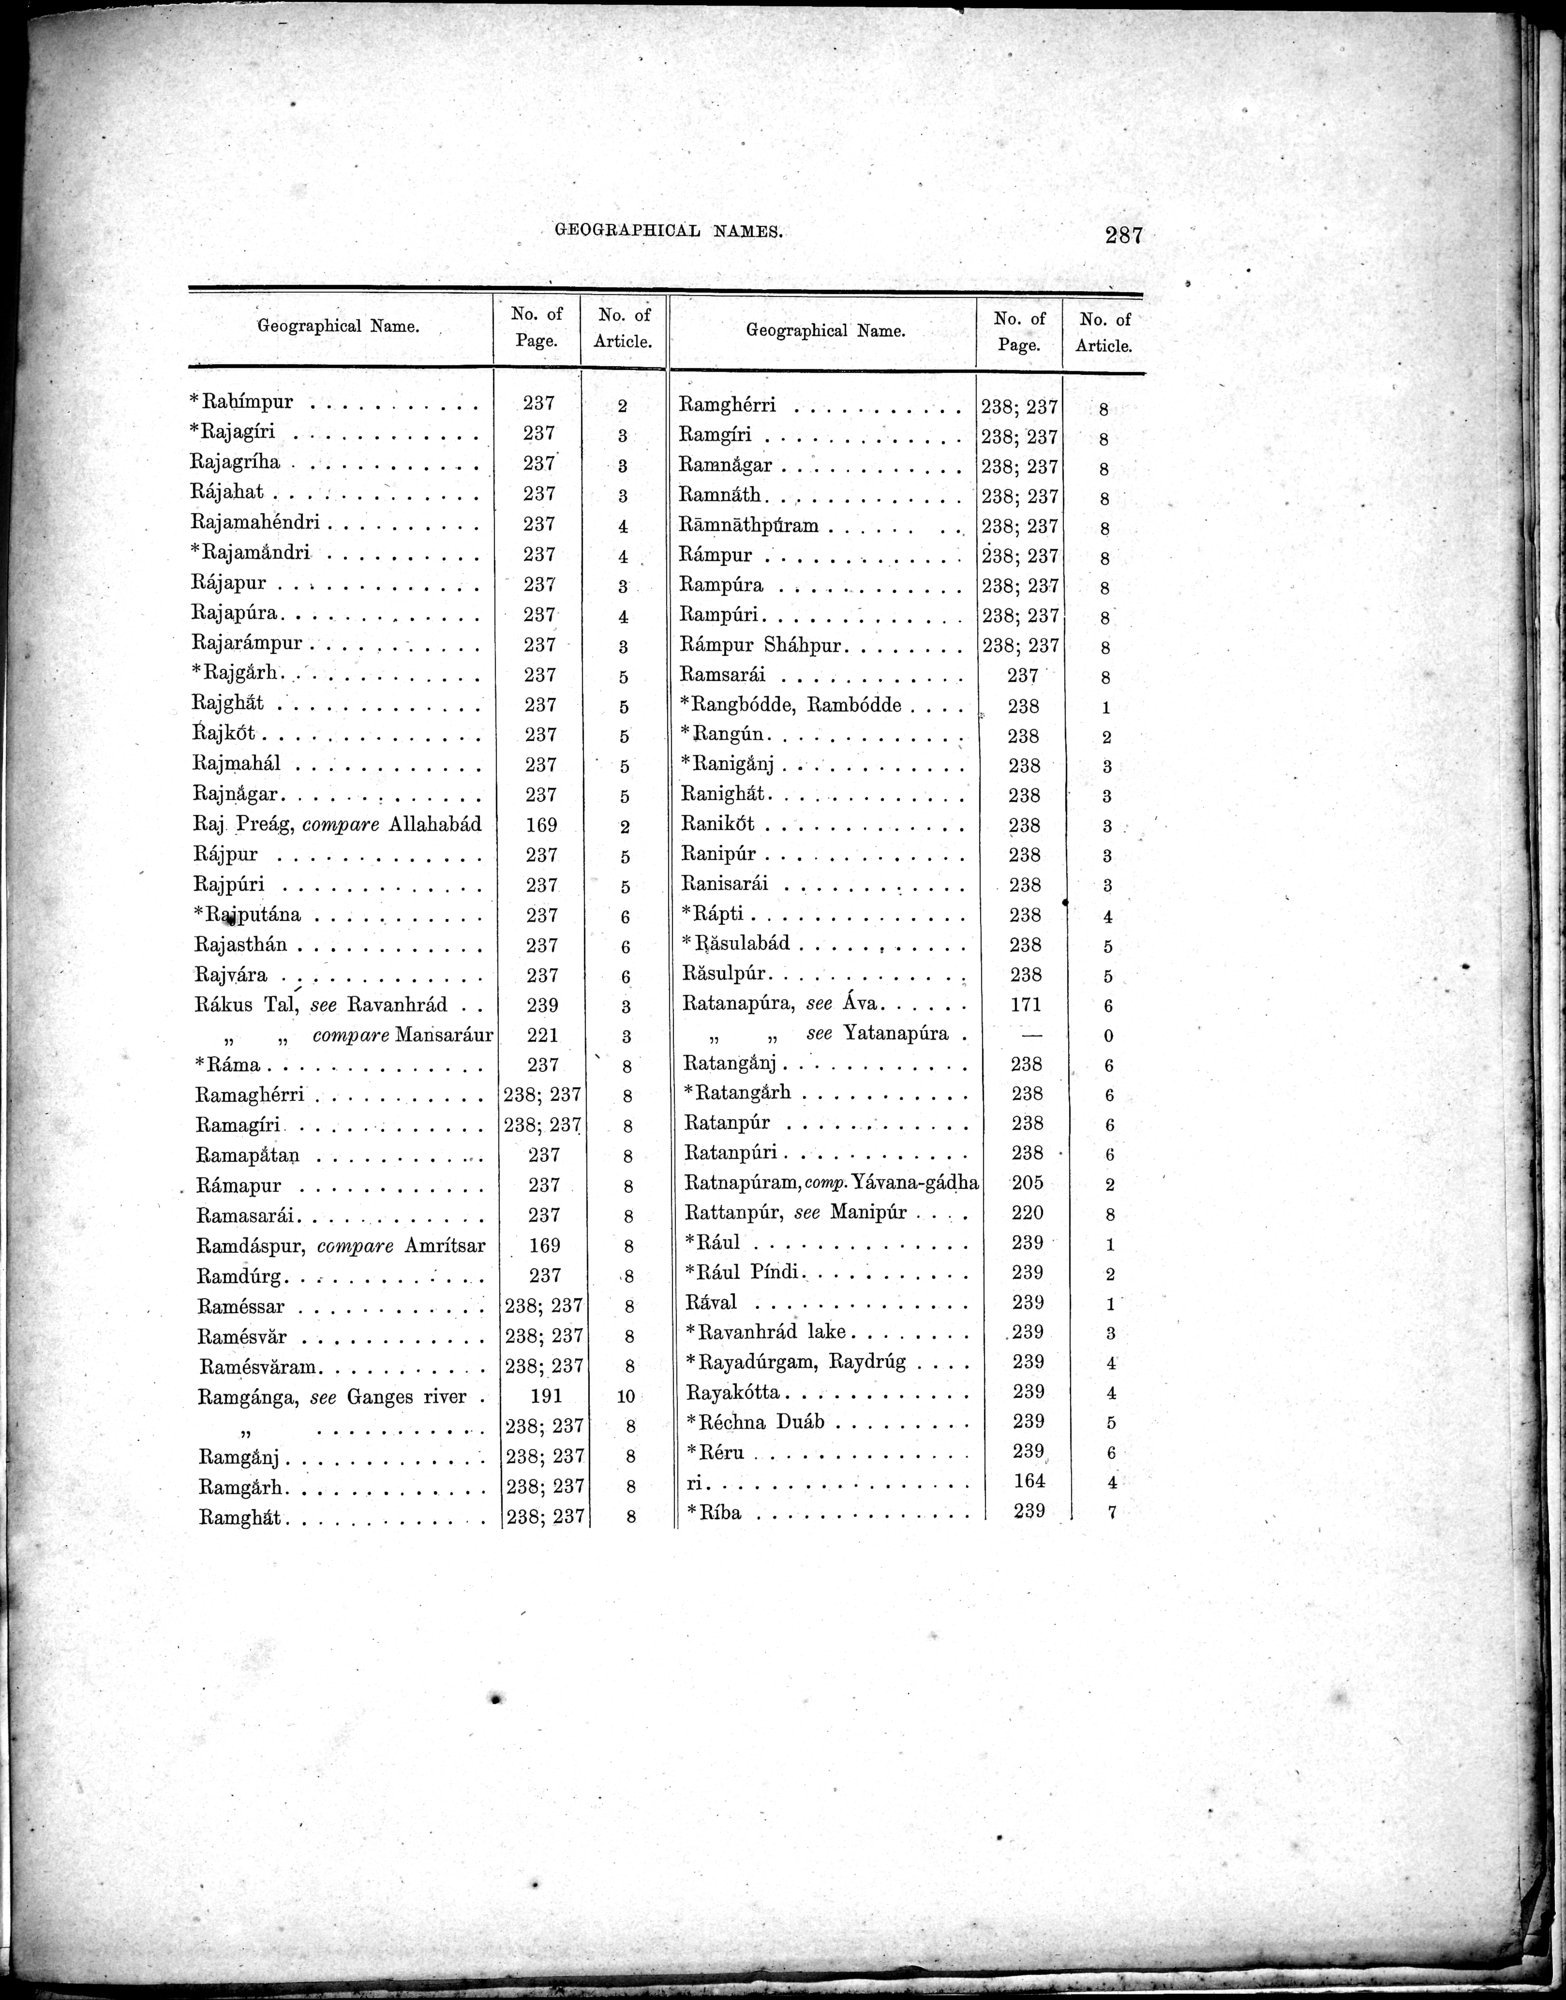 Results of a Scientific Mission to India and High Asia : vol.3 / Page 319 (Grayscale High Resolution Image)